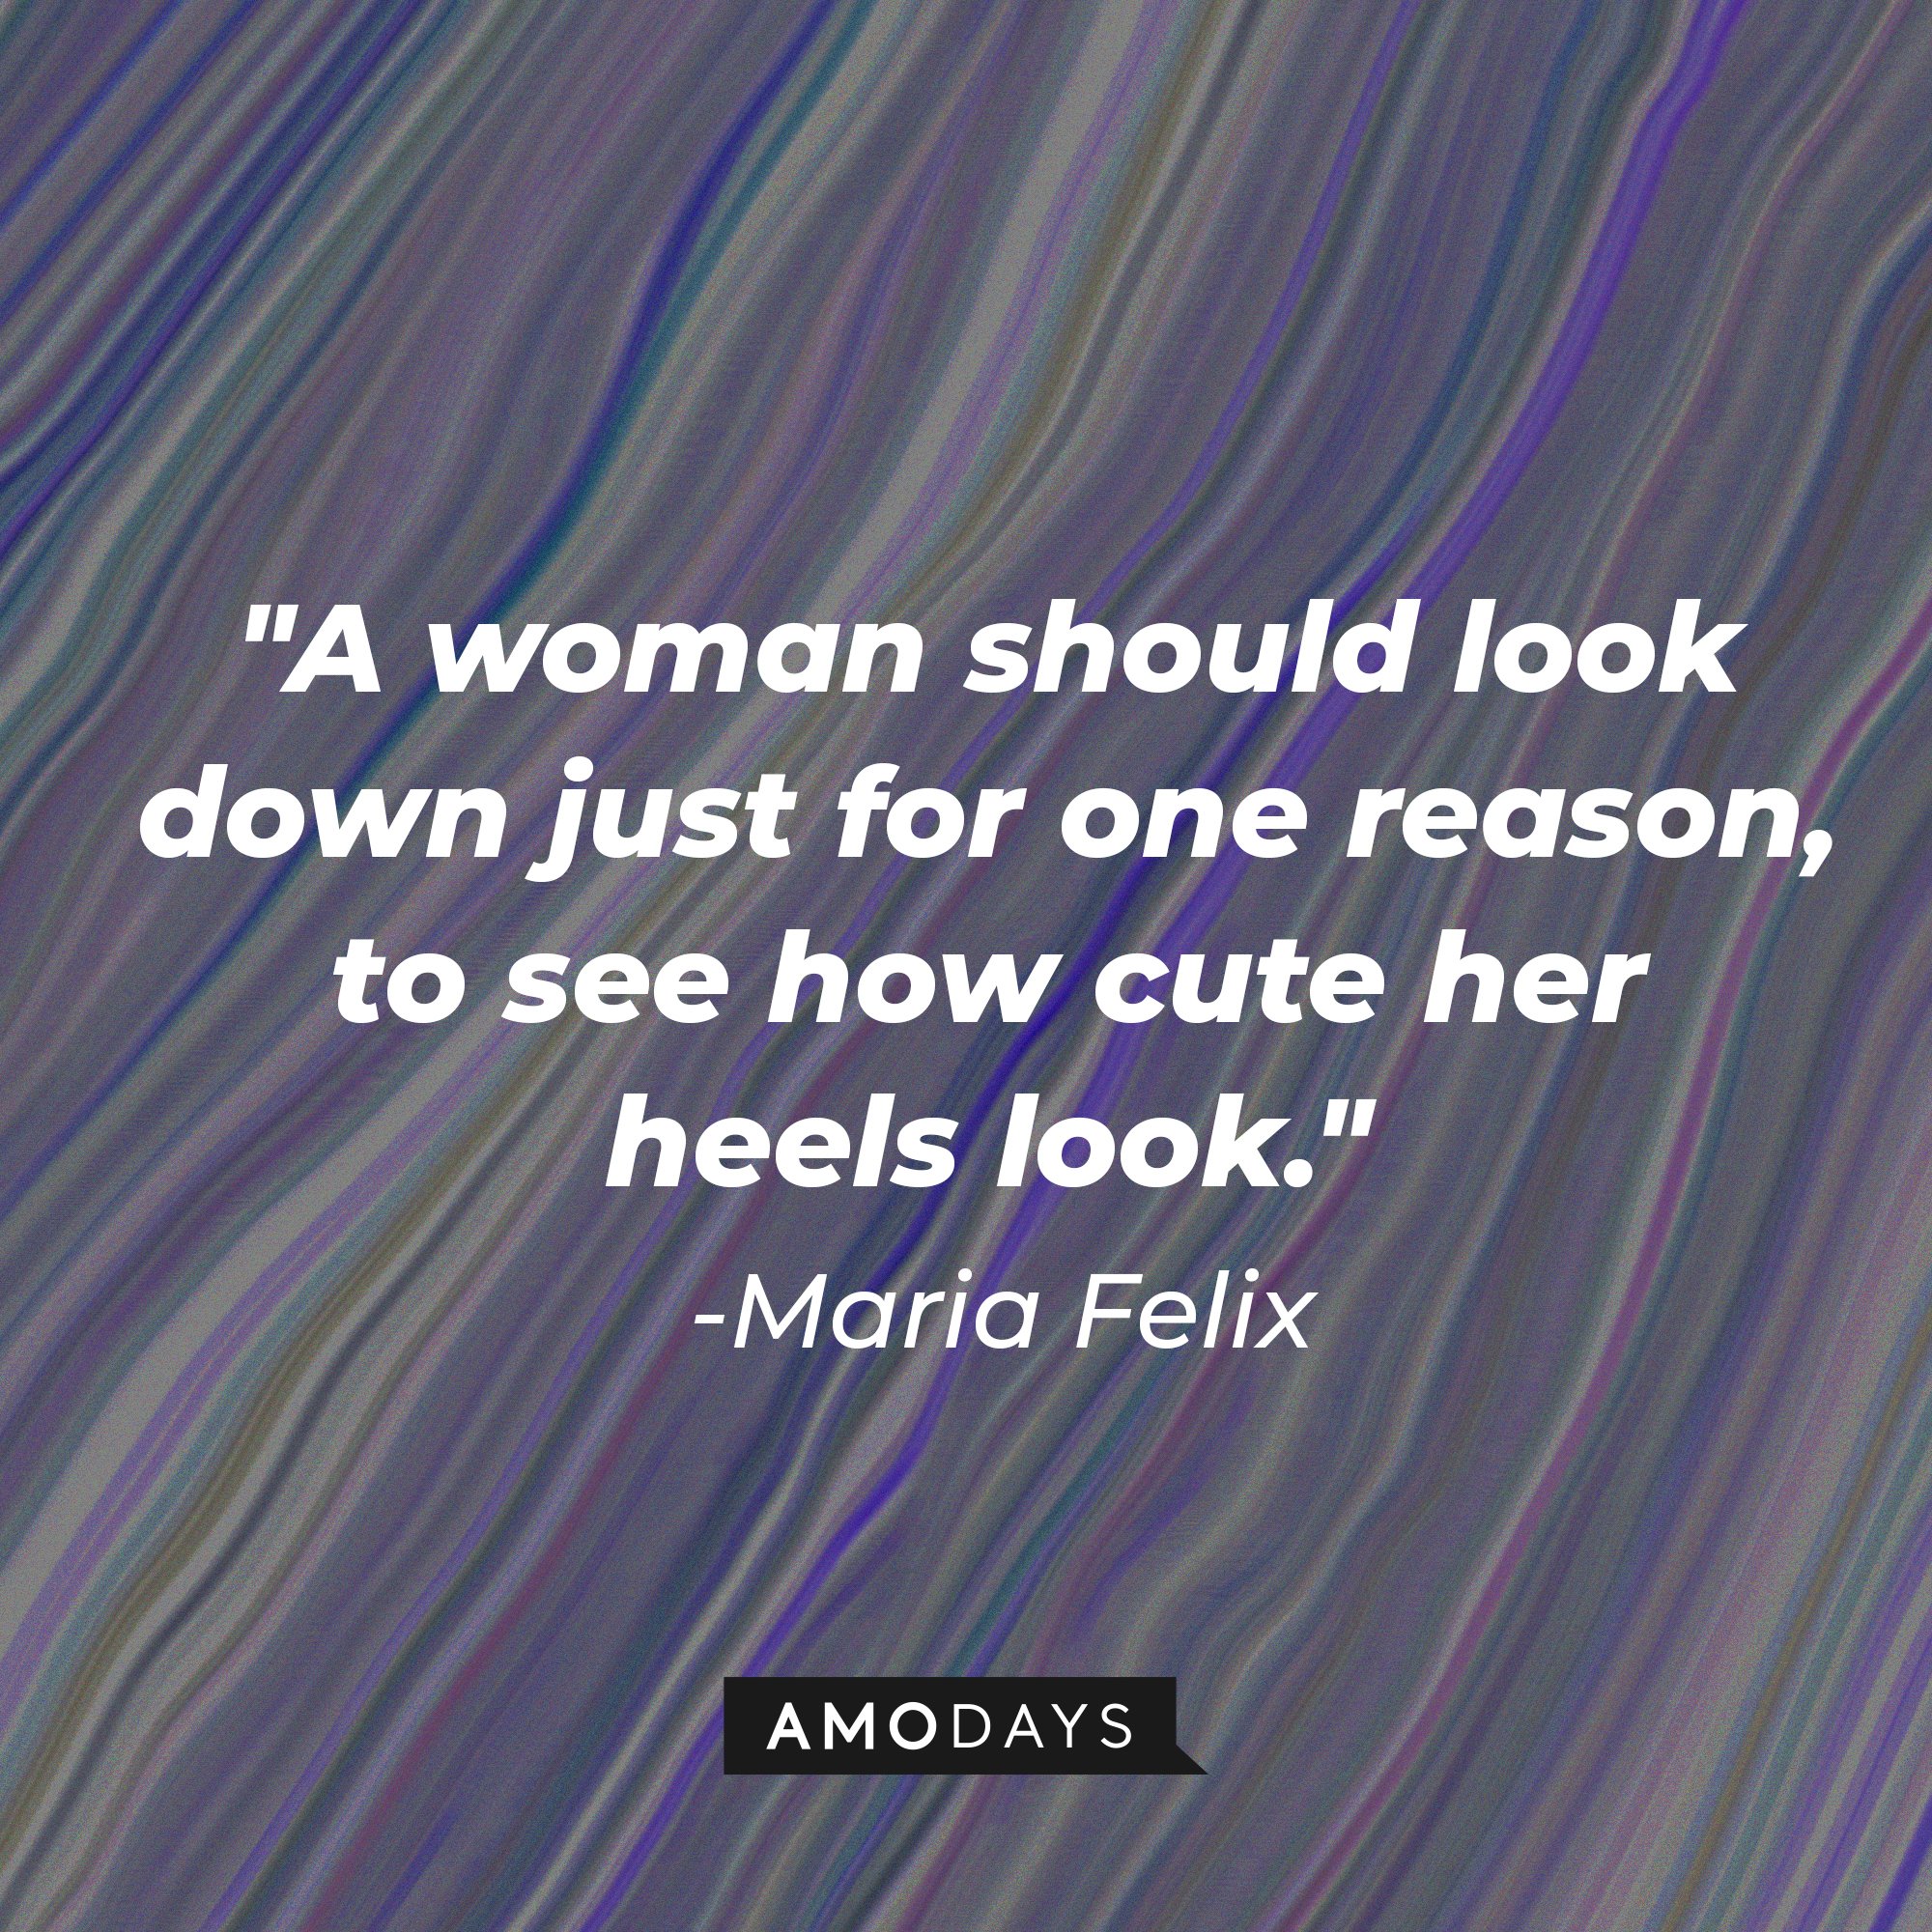 Maria Felix's quote: "A woman should look down just for one reason, to see how cute her heels look." | Image: AmoDays